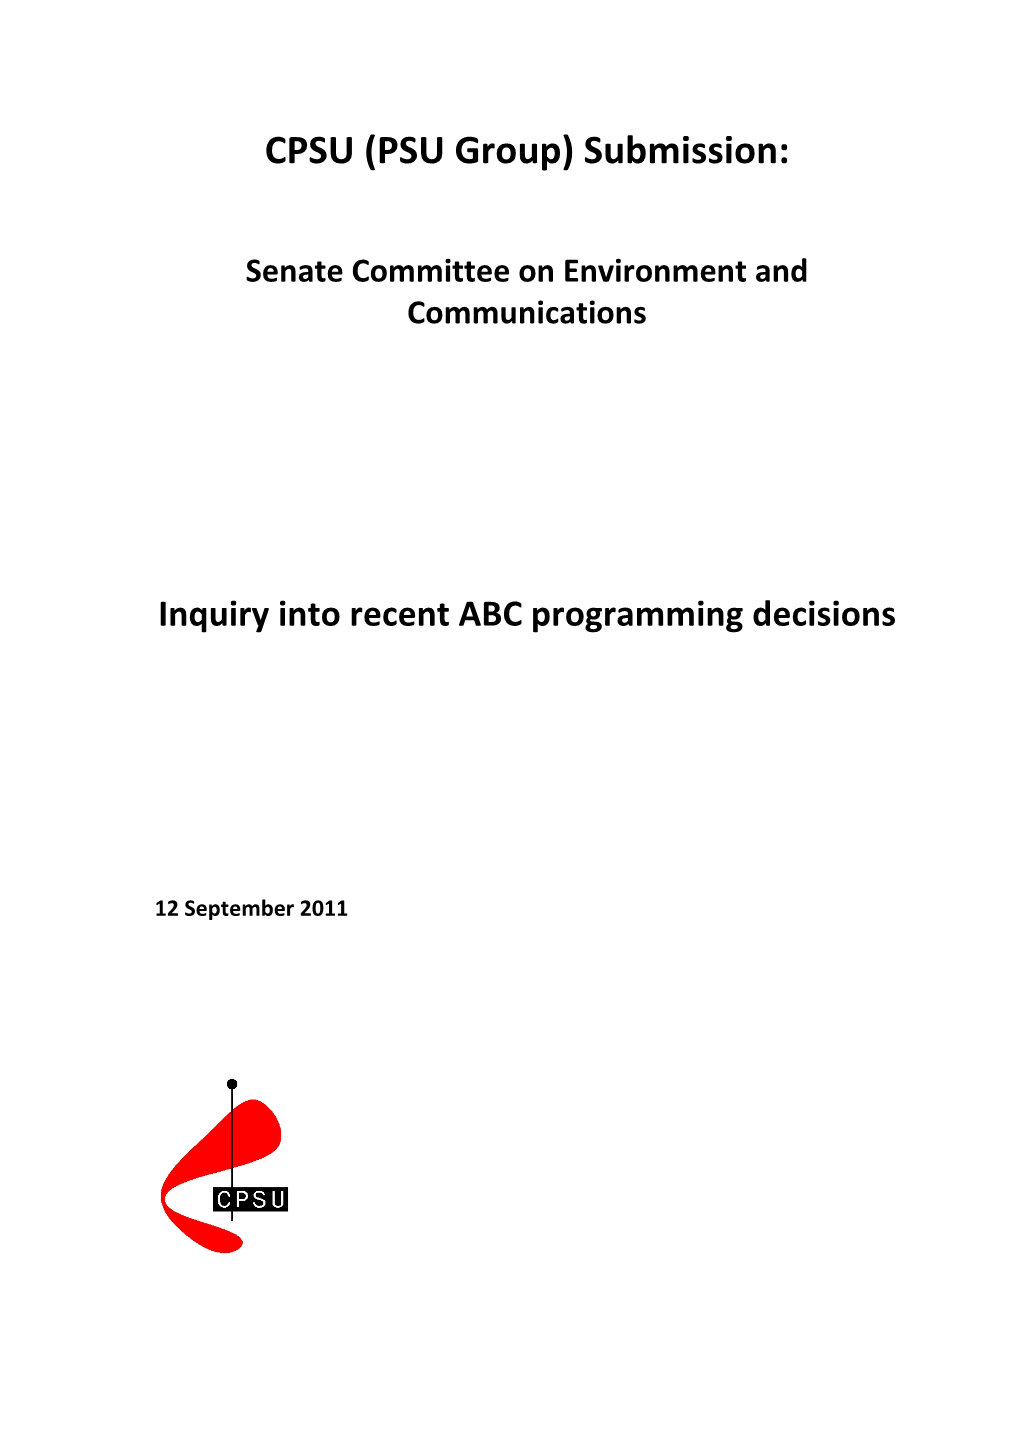 Submission: Inquiry Into Recent ABC Programming Decisions